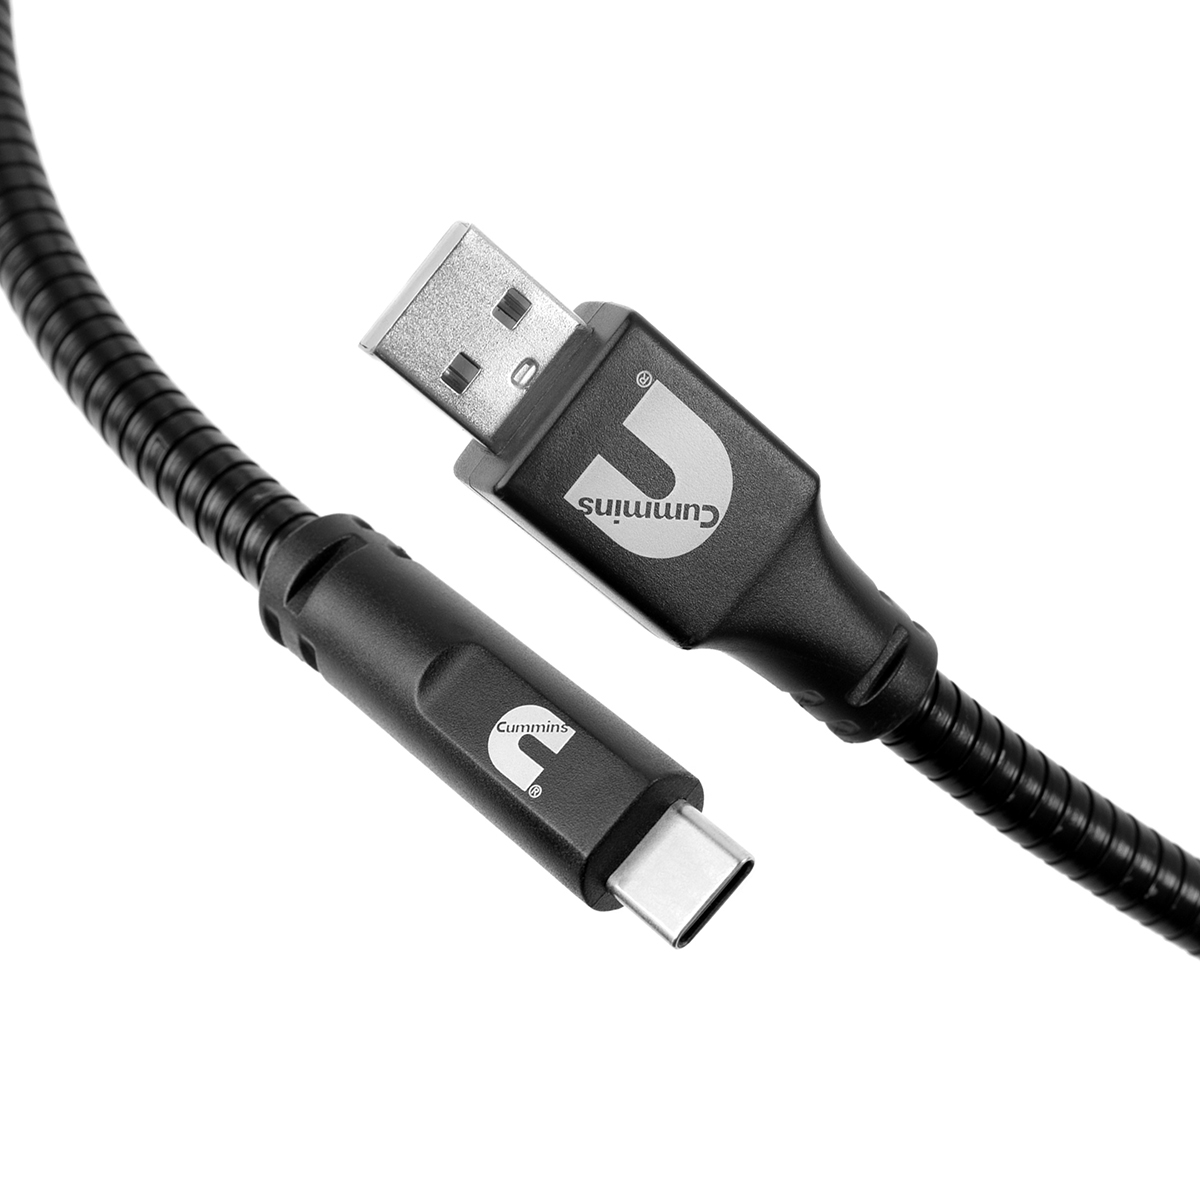 Cummins USB Type C Cable Android Compatible with 3 Cable Organizers CMN4702